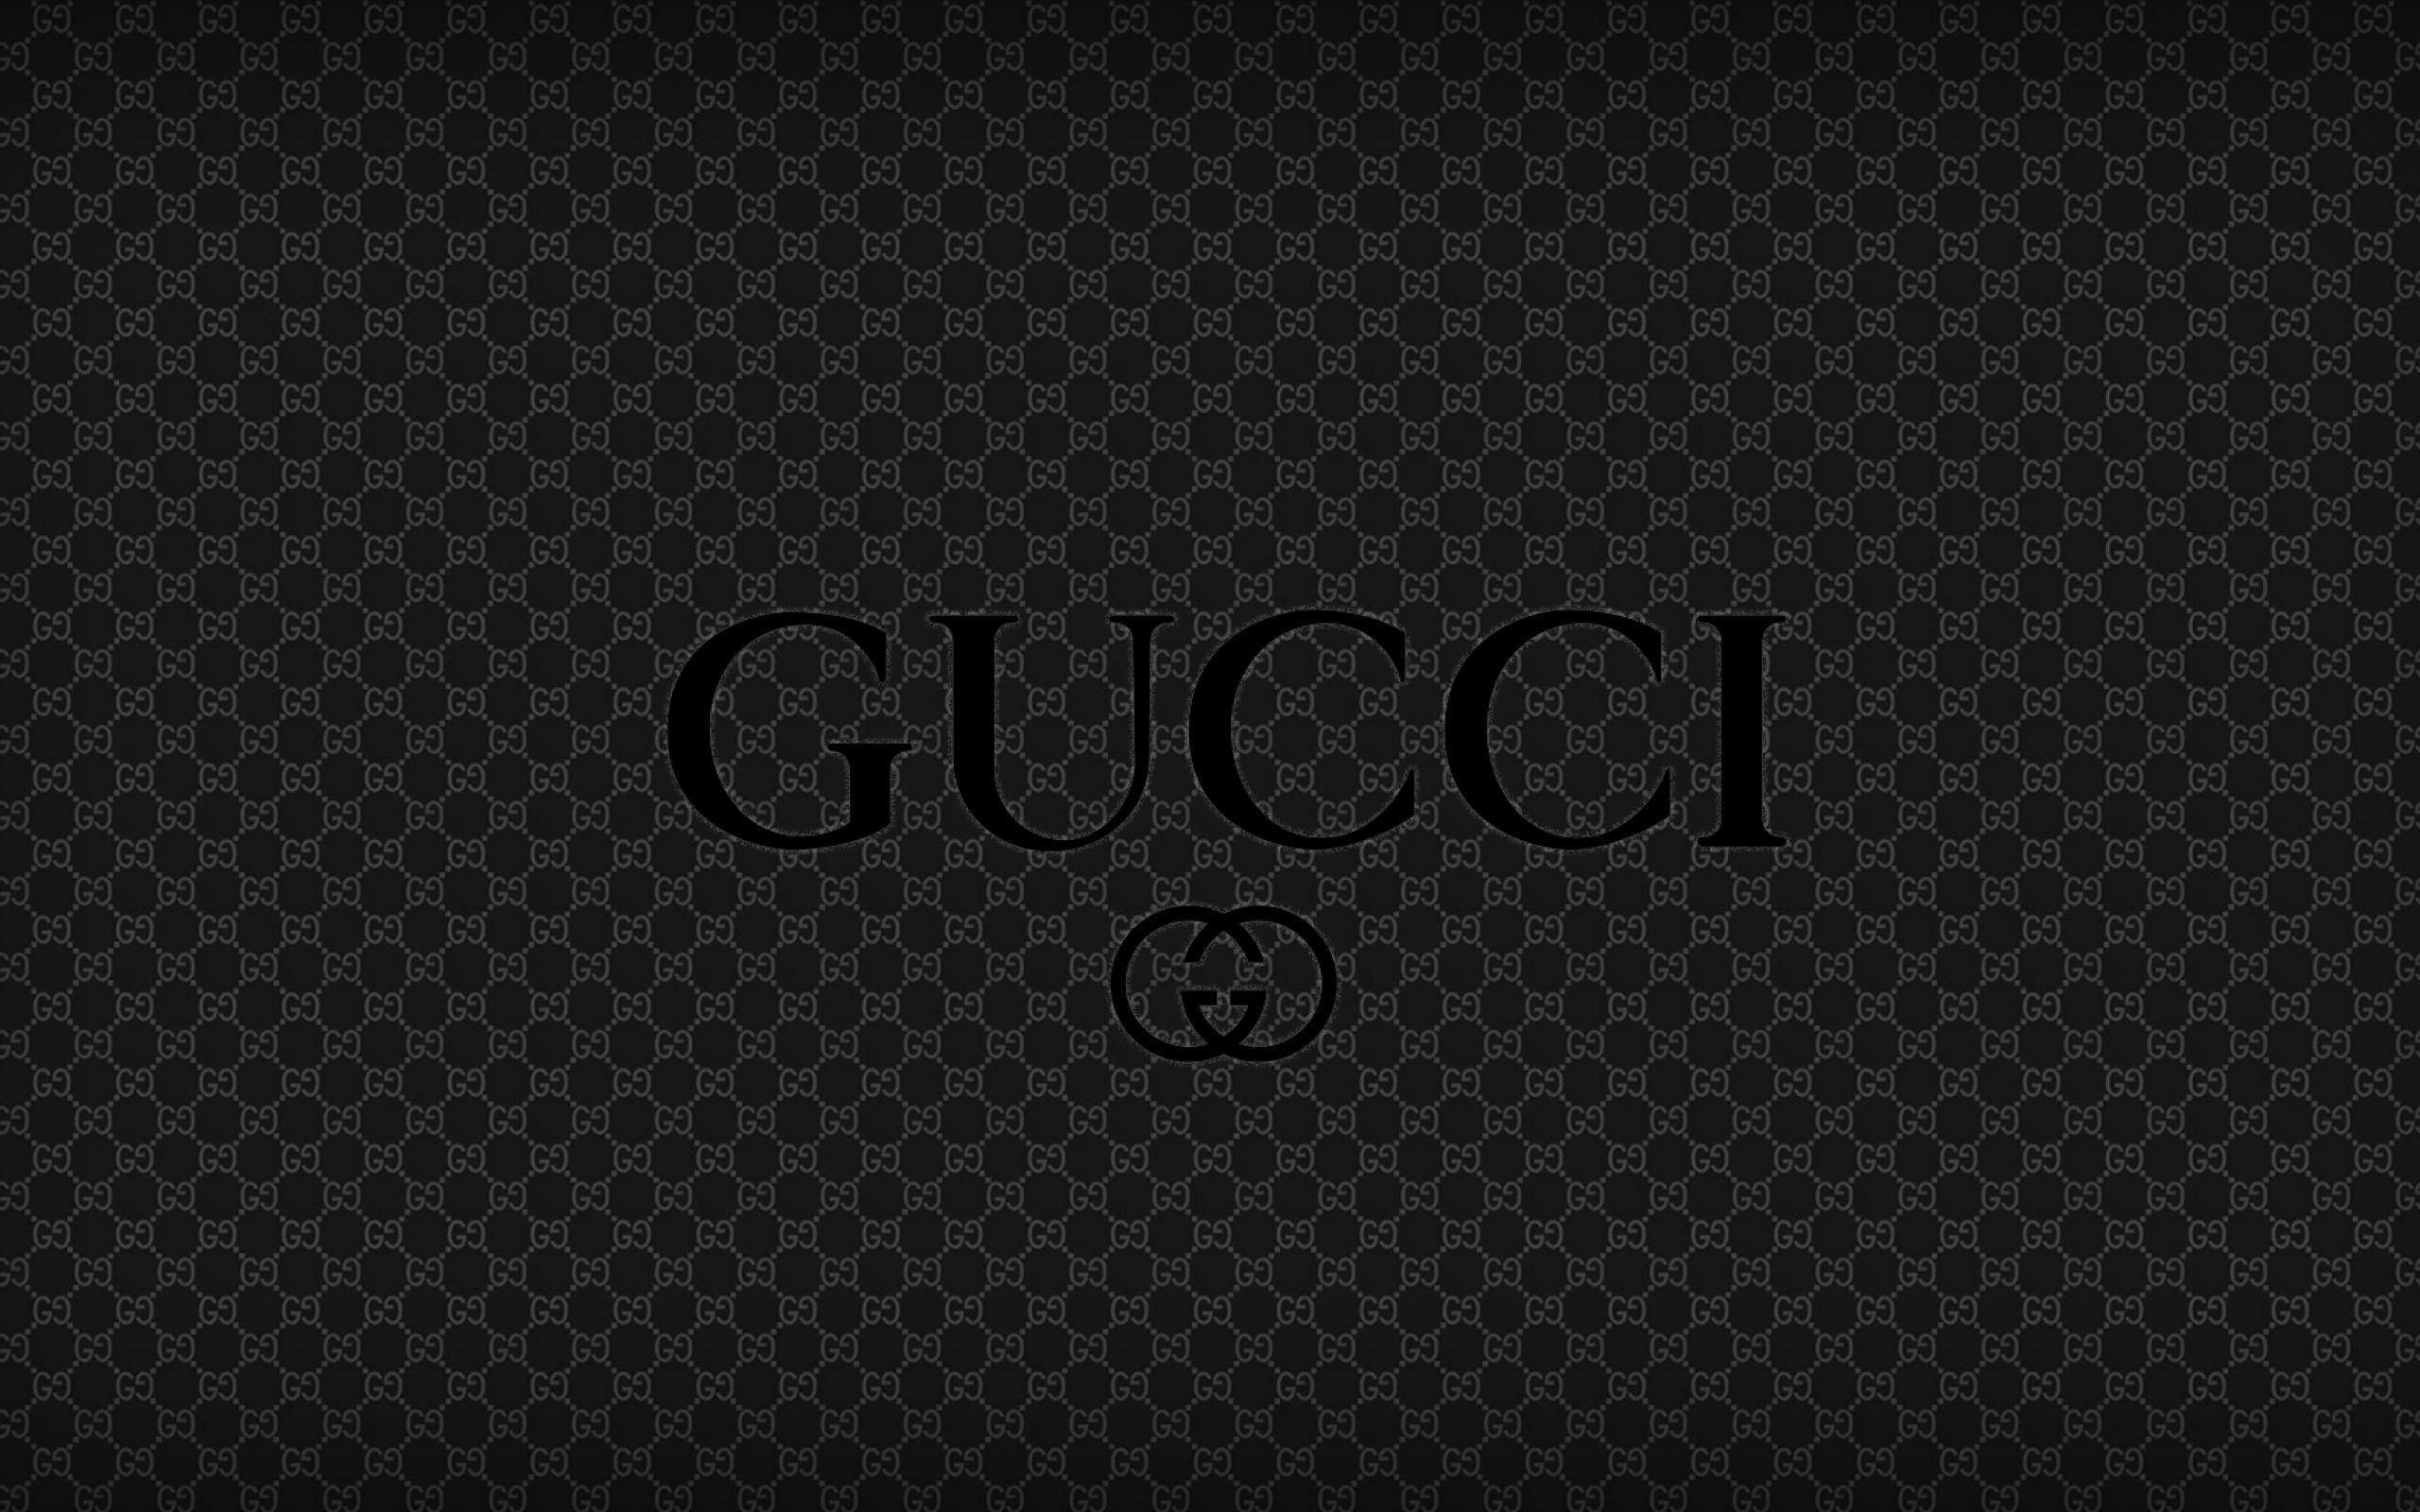 Gold Gucci Wallpaper Free Gold Gucci Background